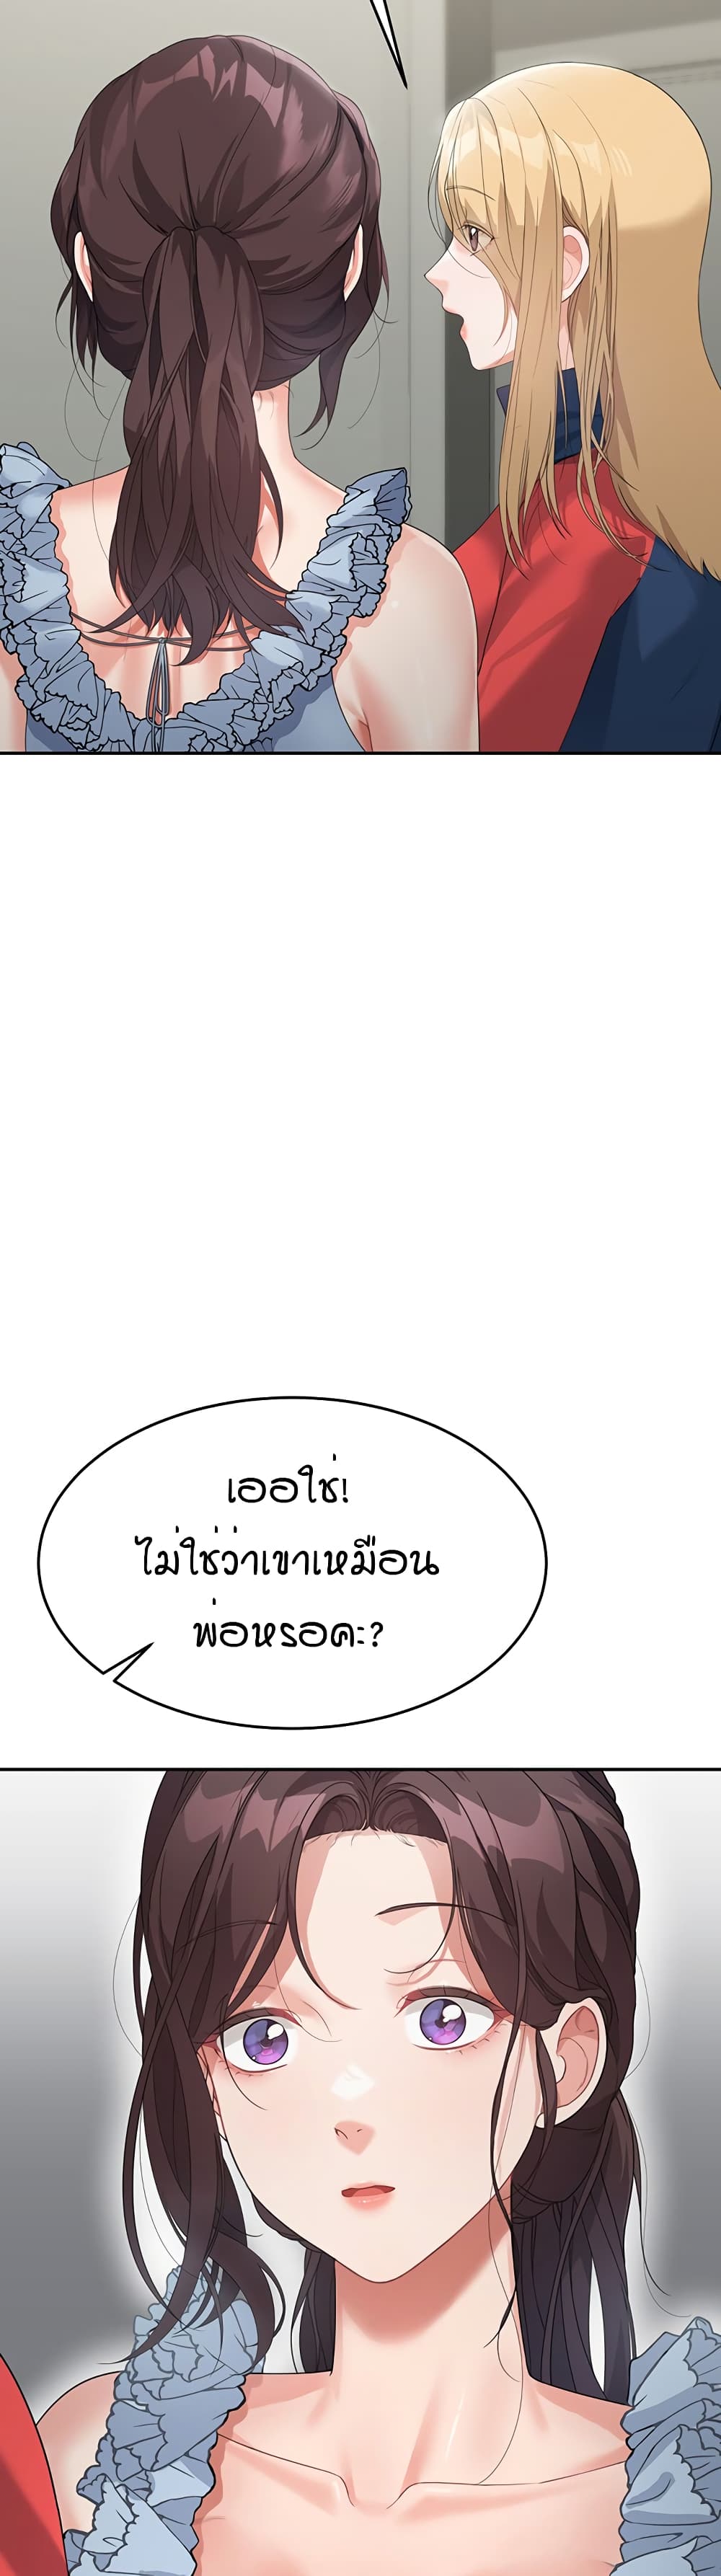 Is It Your Mother or Sister? ตอนที่ 6 ภาพ 28